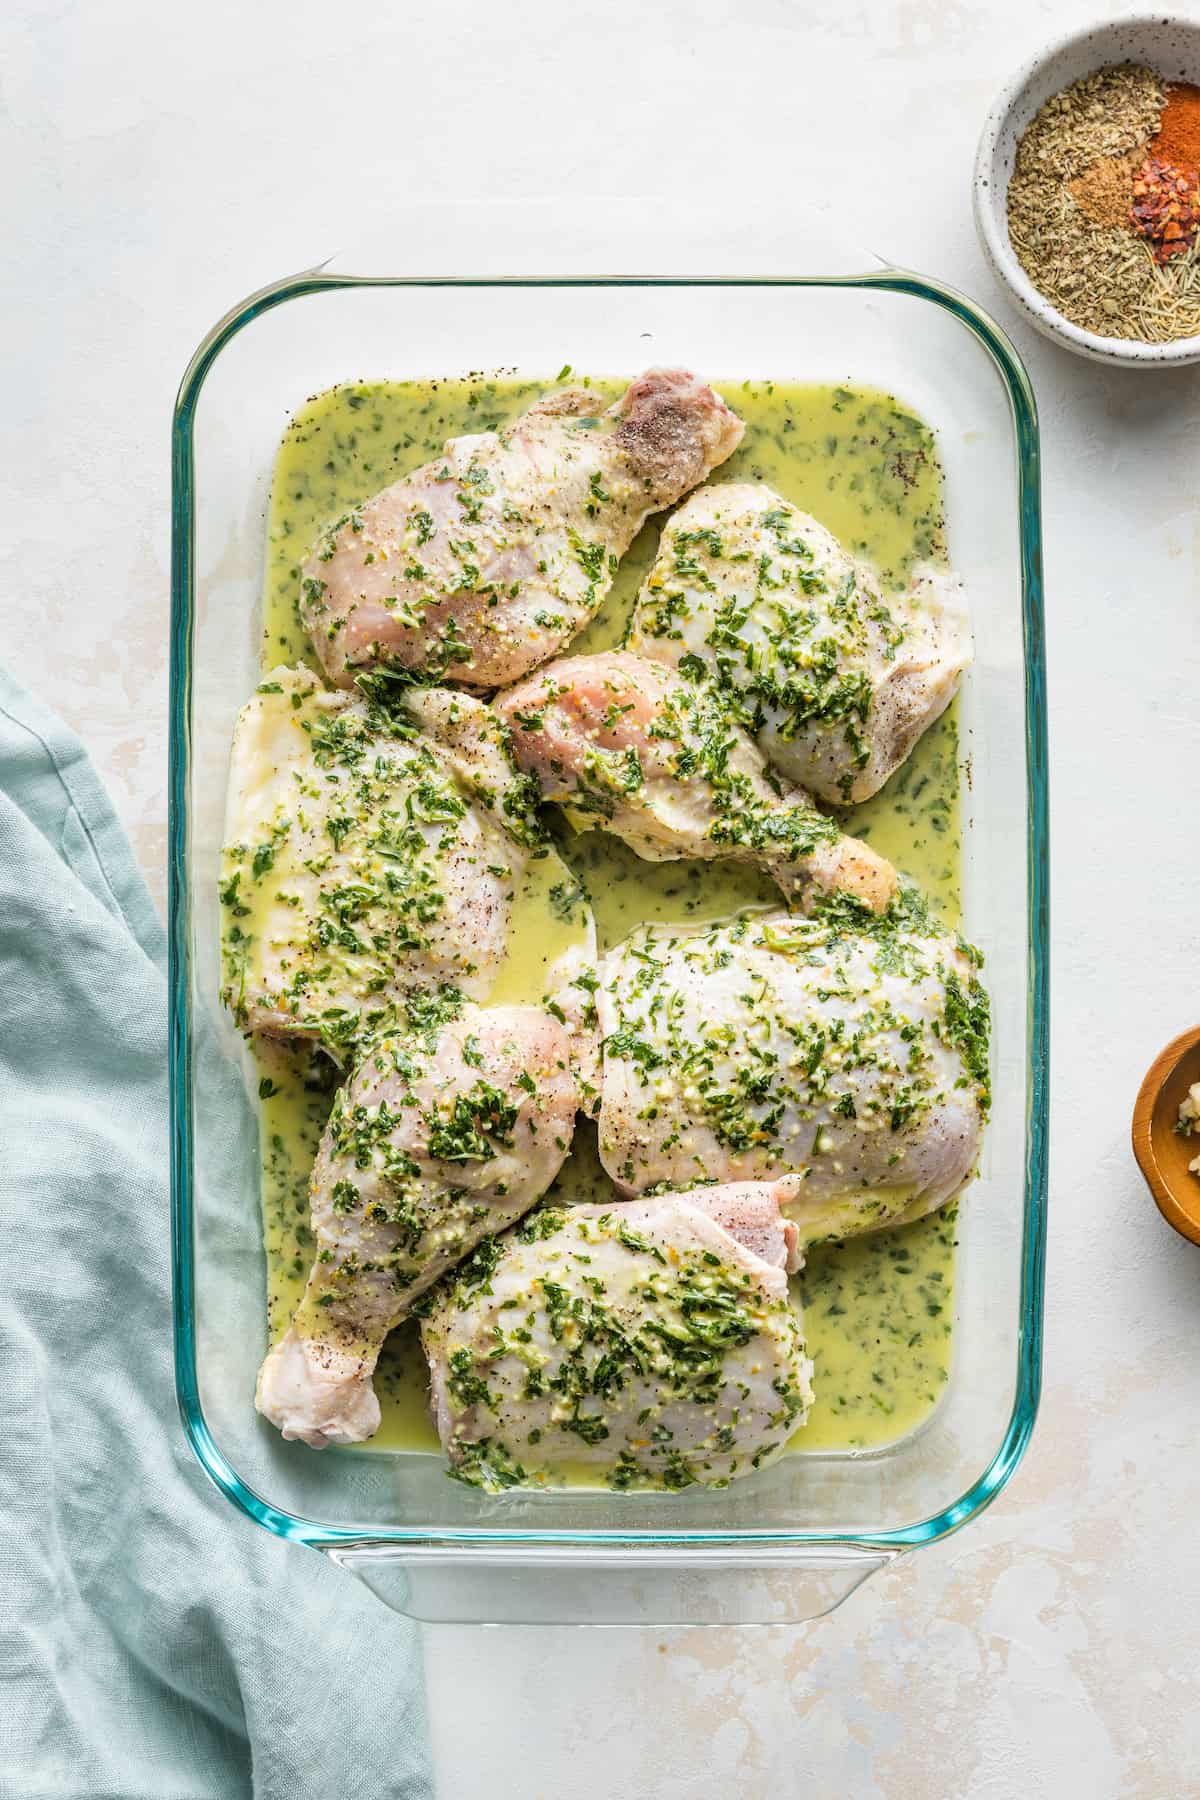 Orange herb sauce poured over raw chicken pieces in a baking dish.